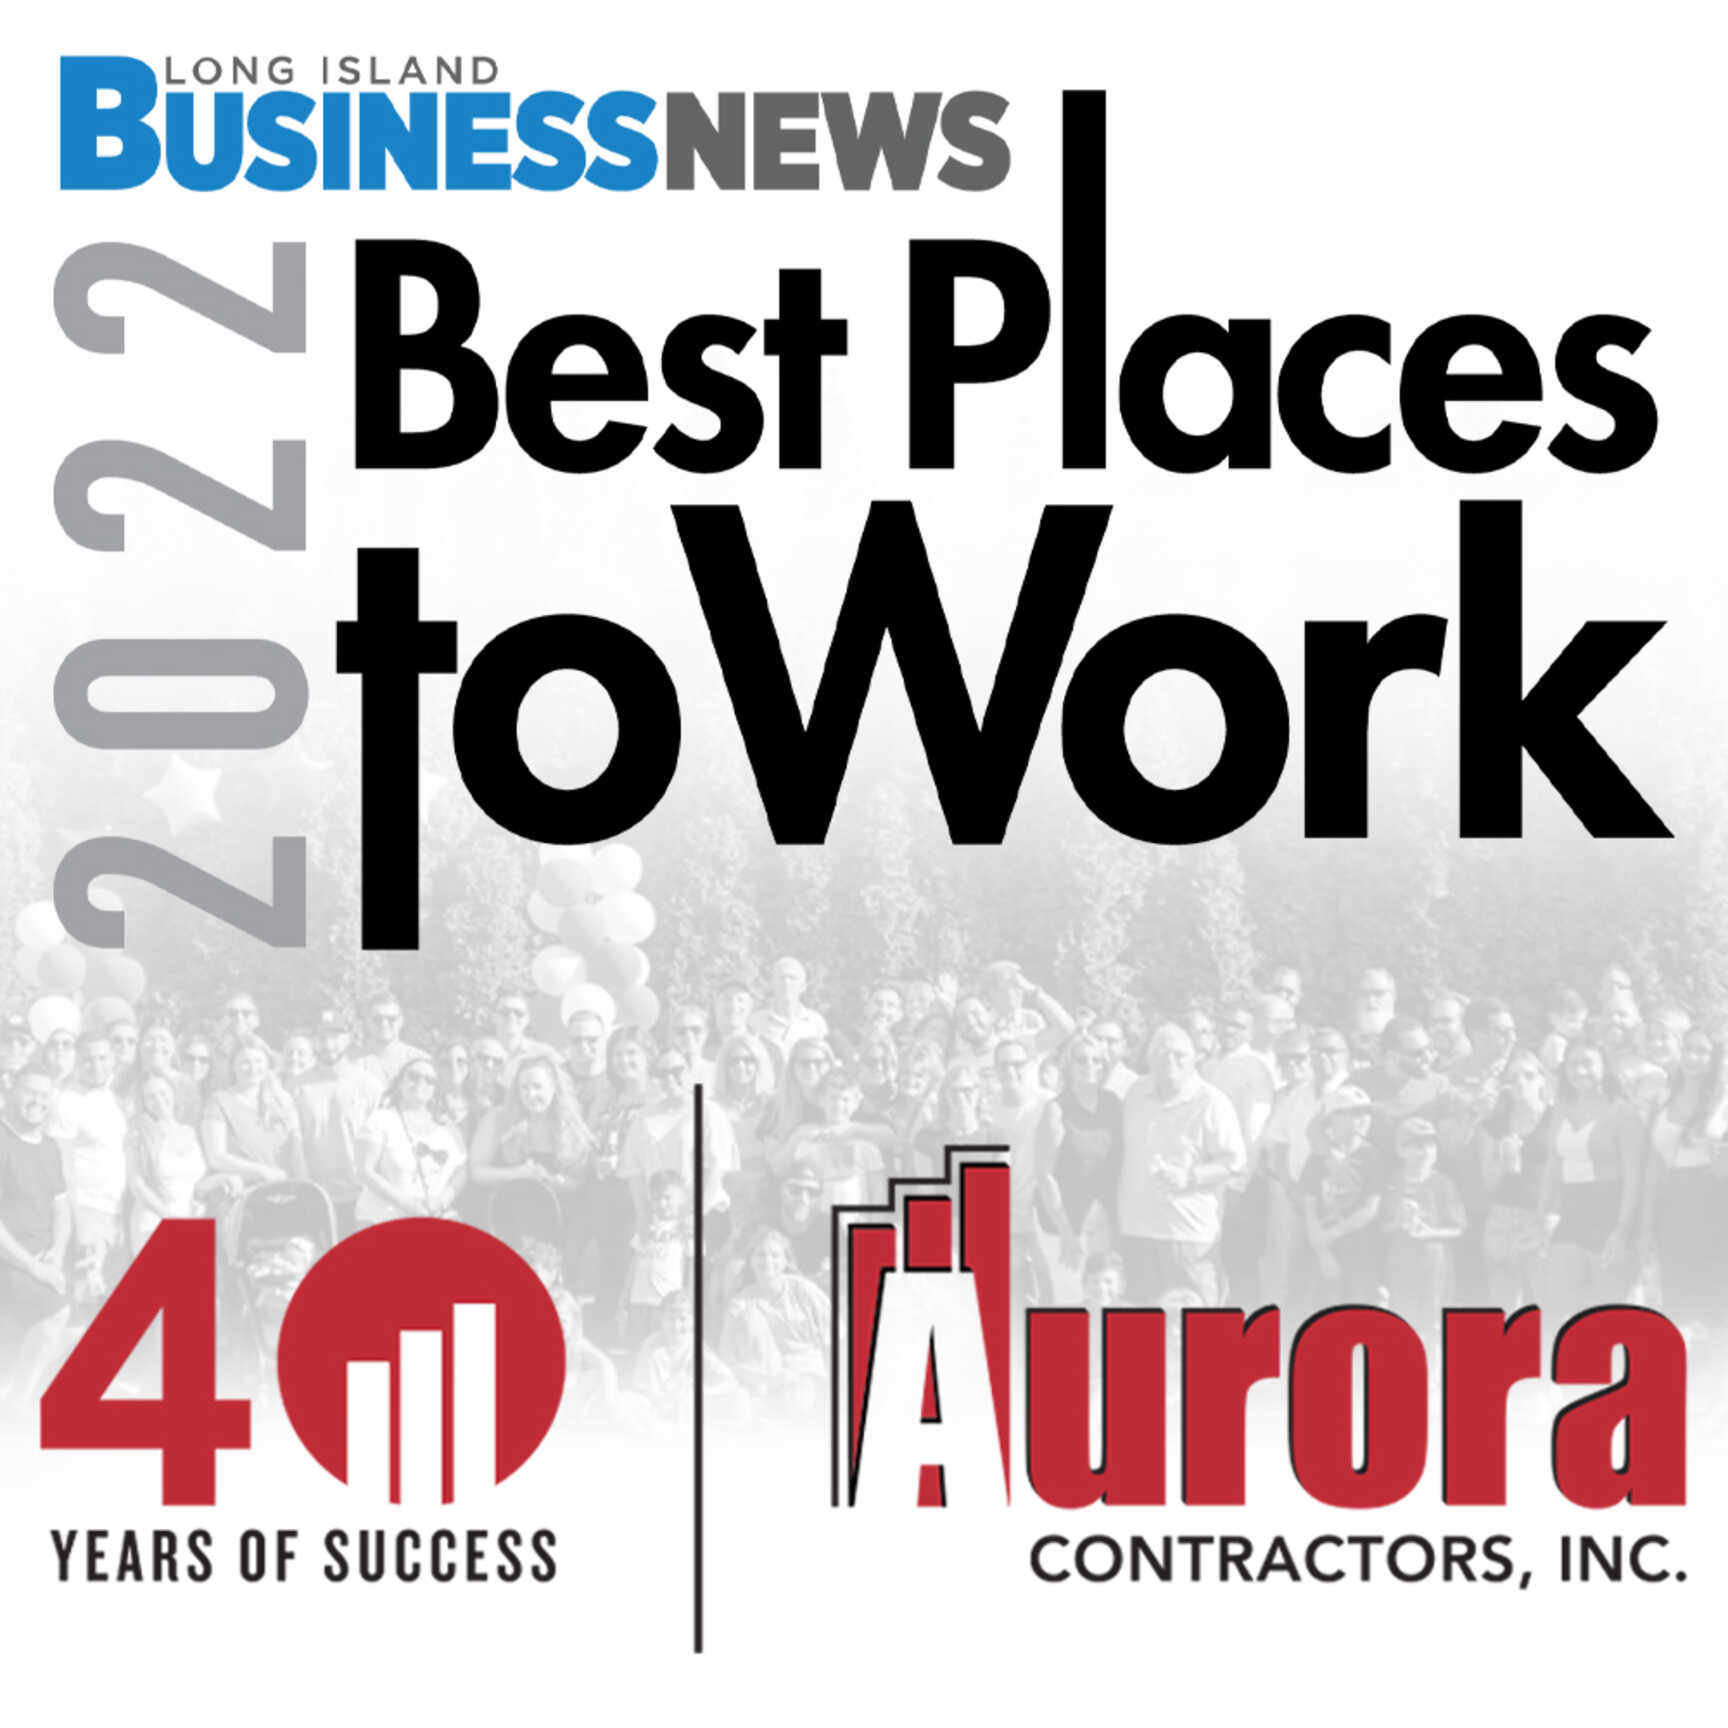 Aurora Contractors Selected As One Of The Best Places To Work on LI!